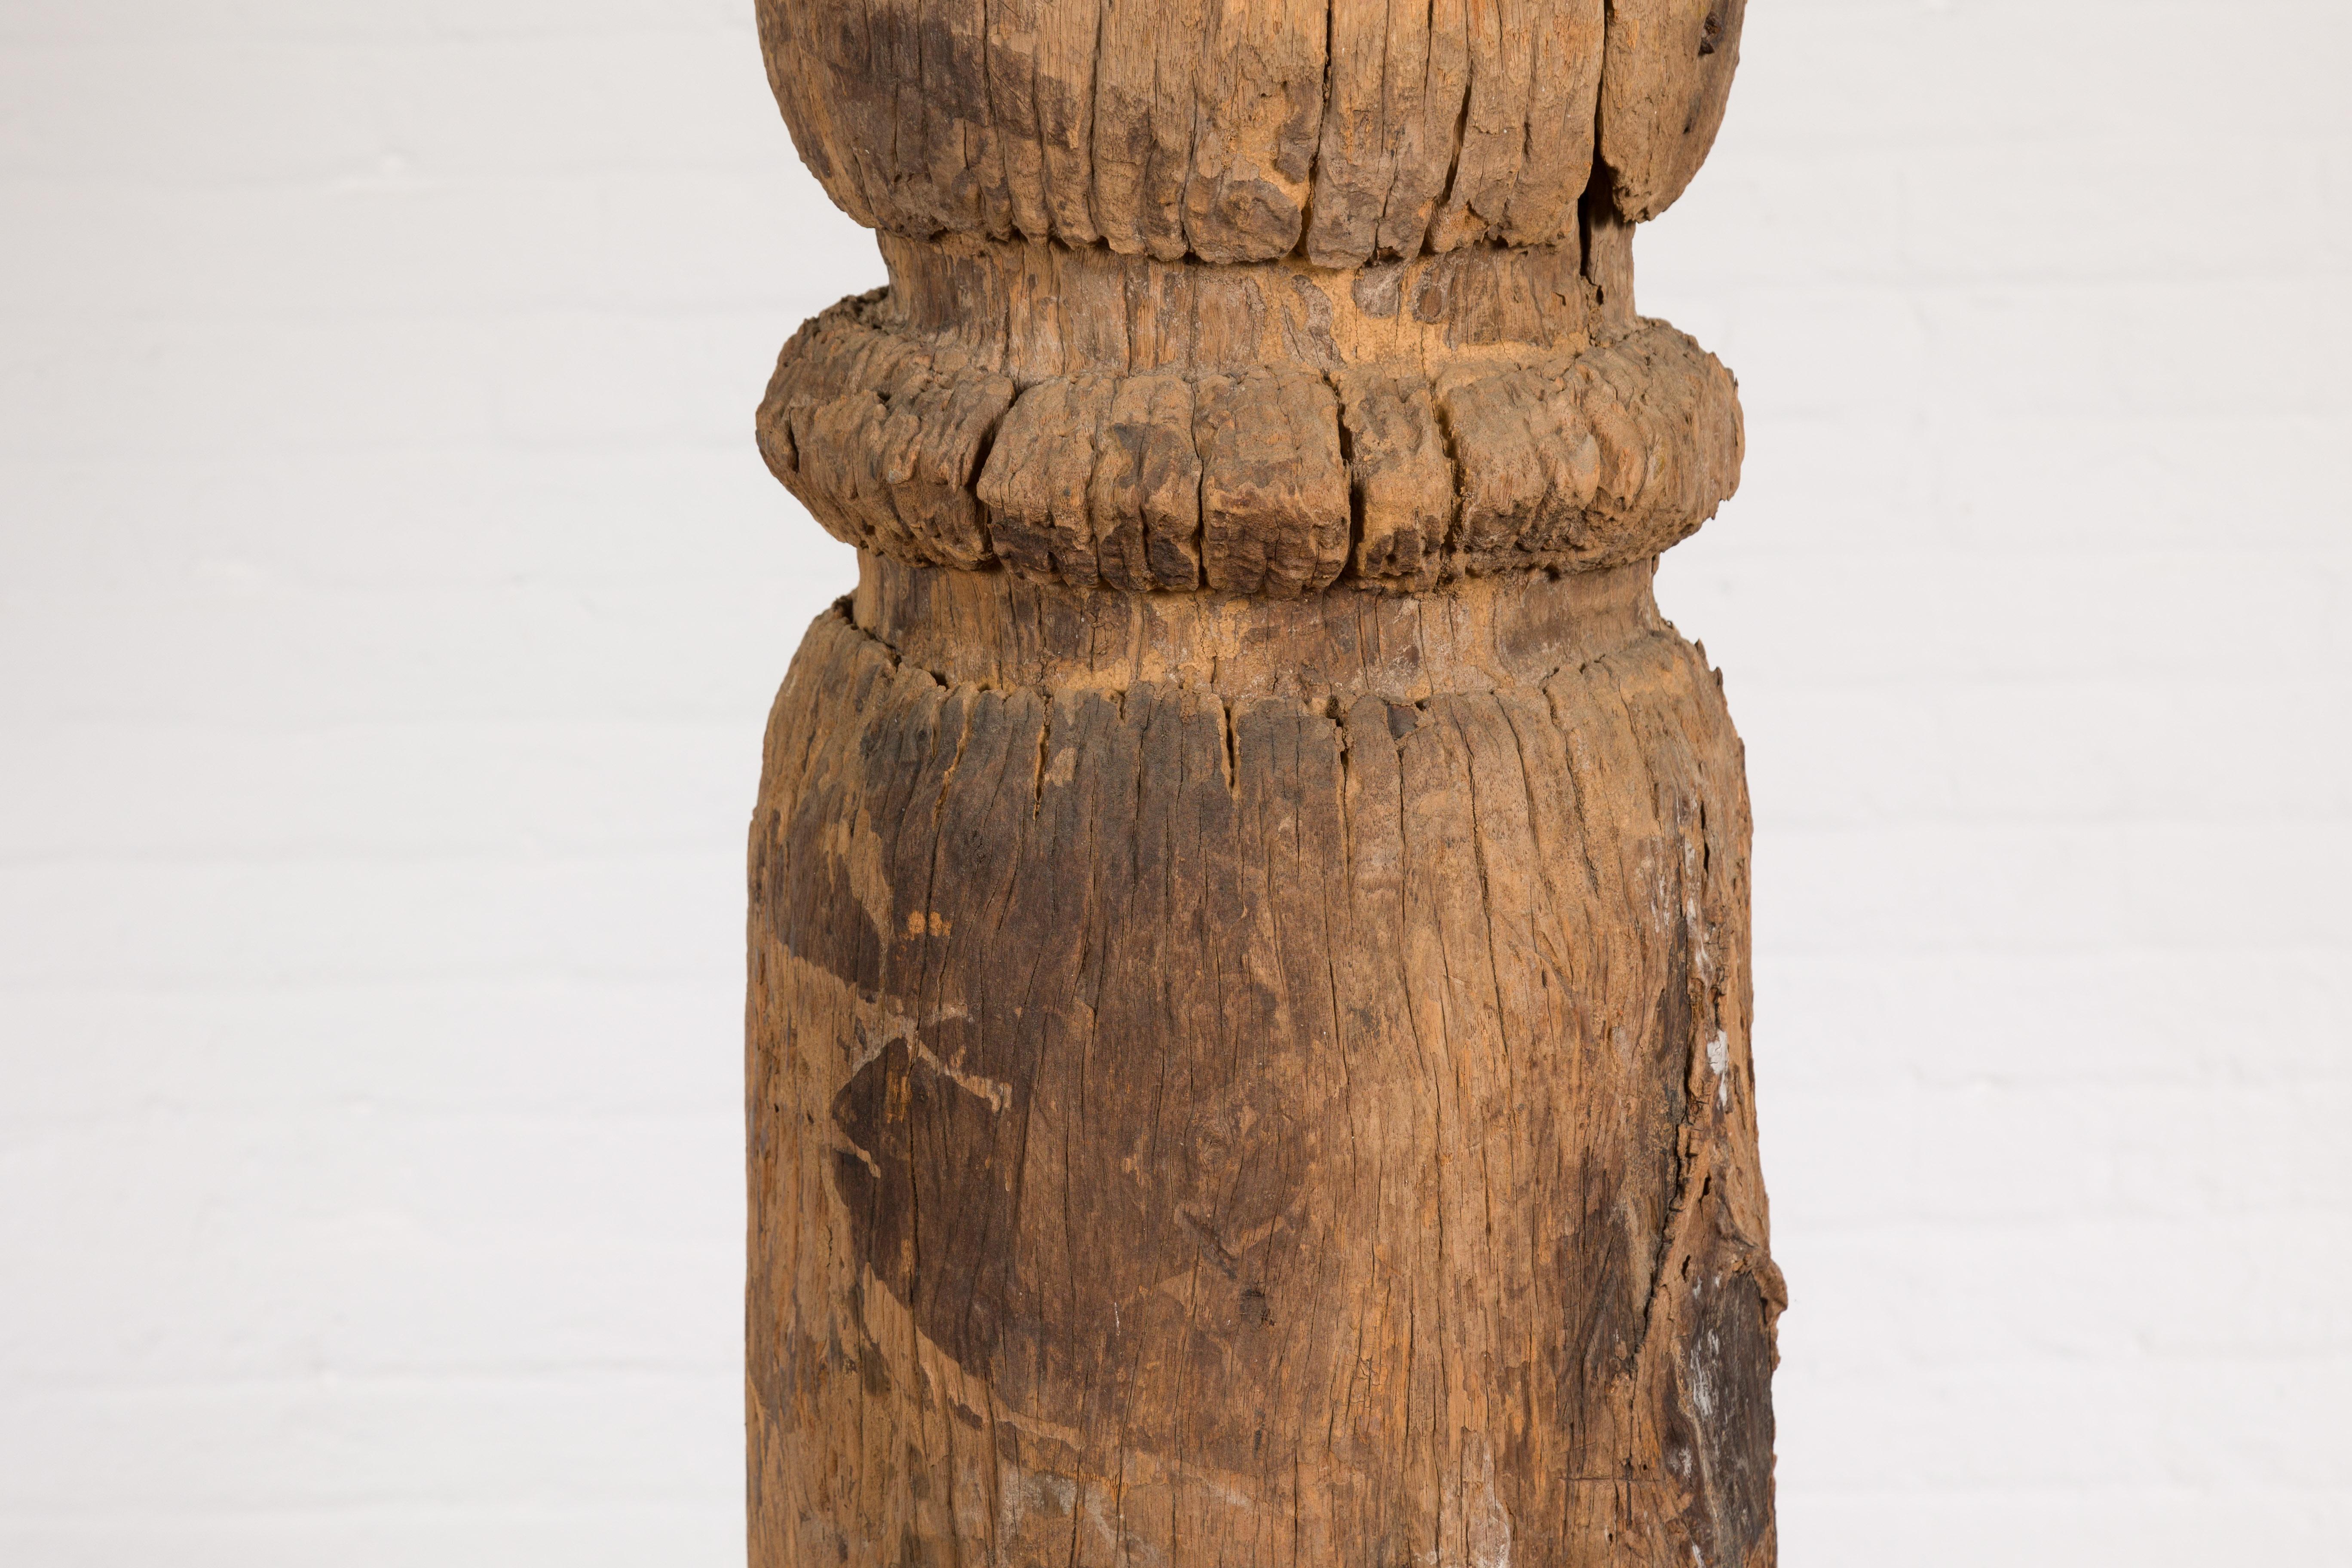 Wood Antique Rustic Hand Carved 19th Century Northern Thai Cylindrical Pole Sculpture For Sale